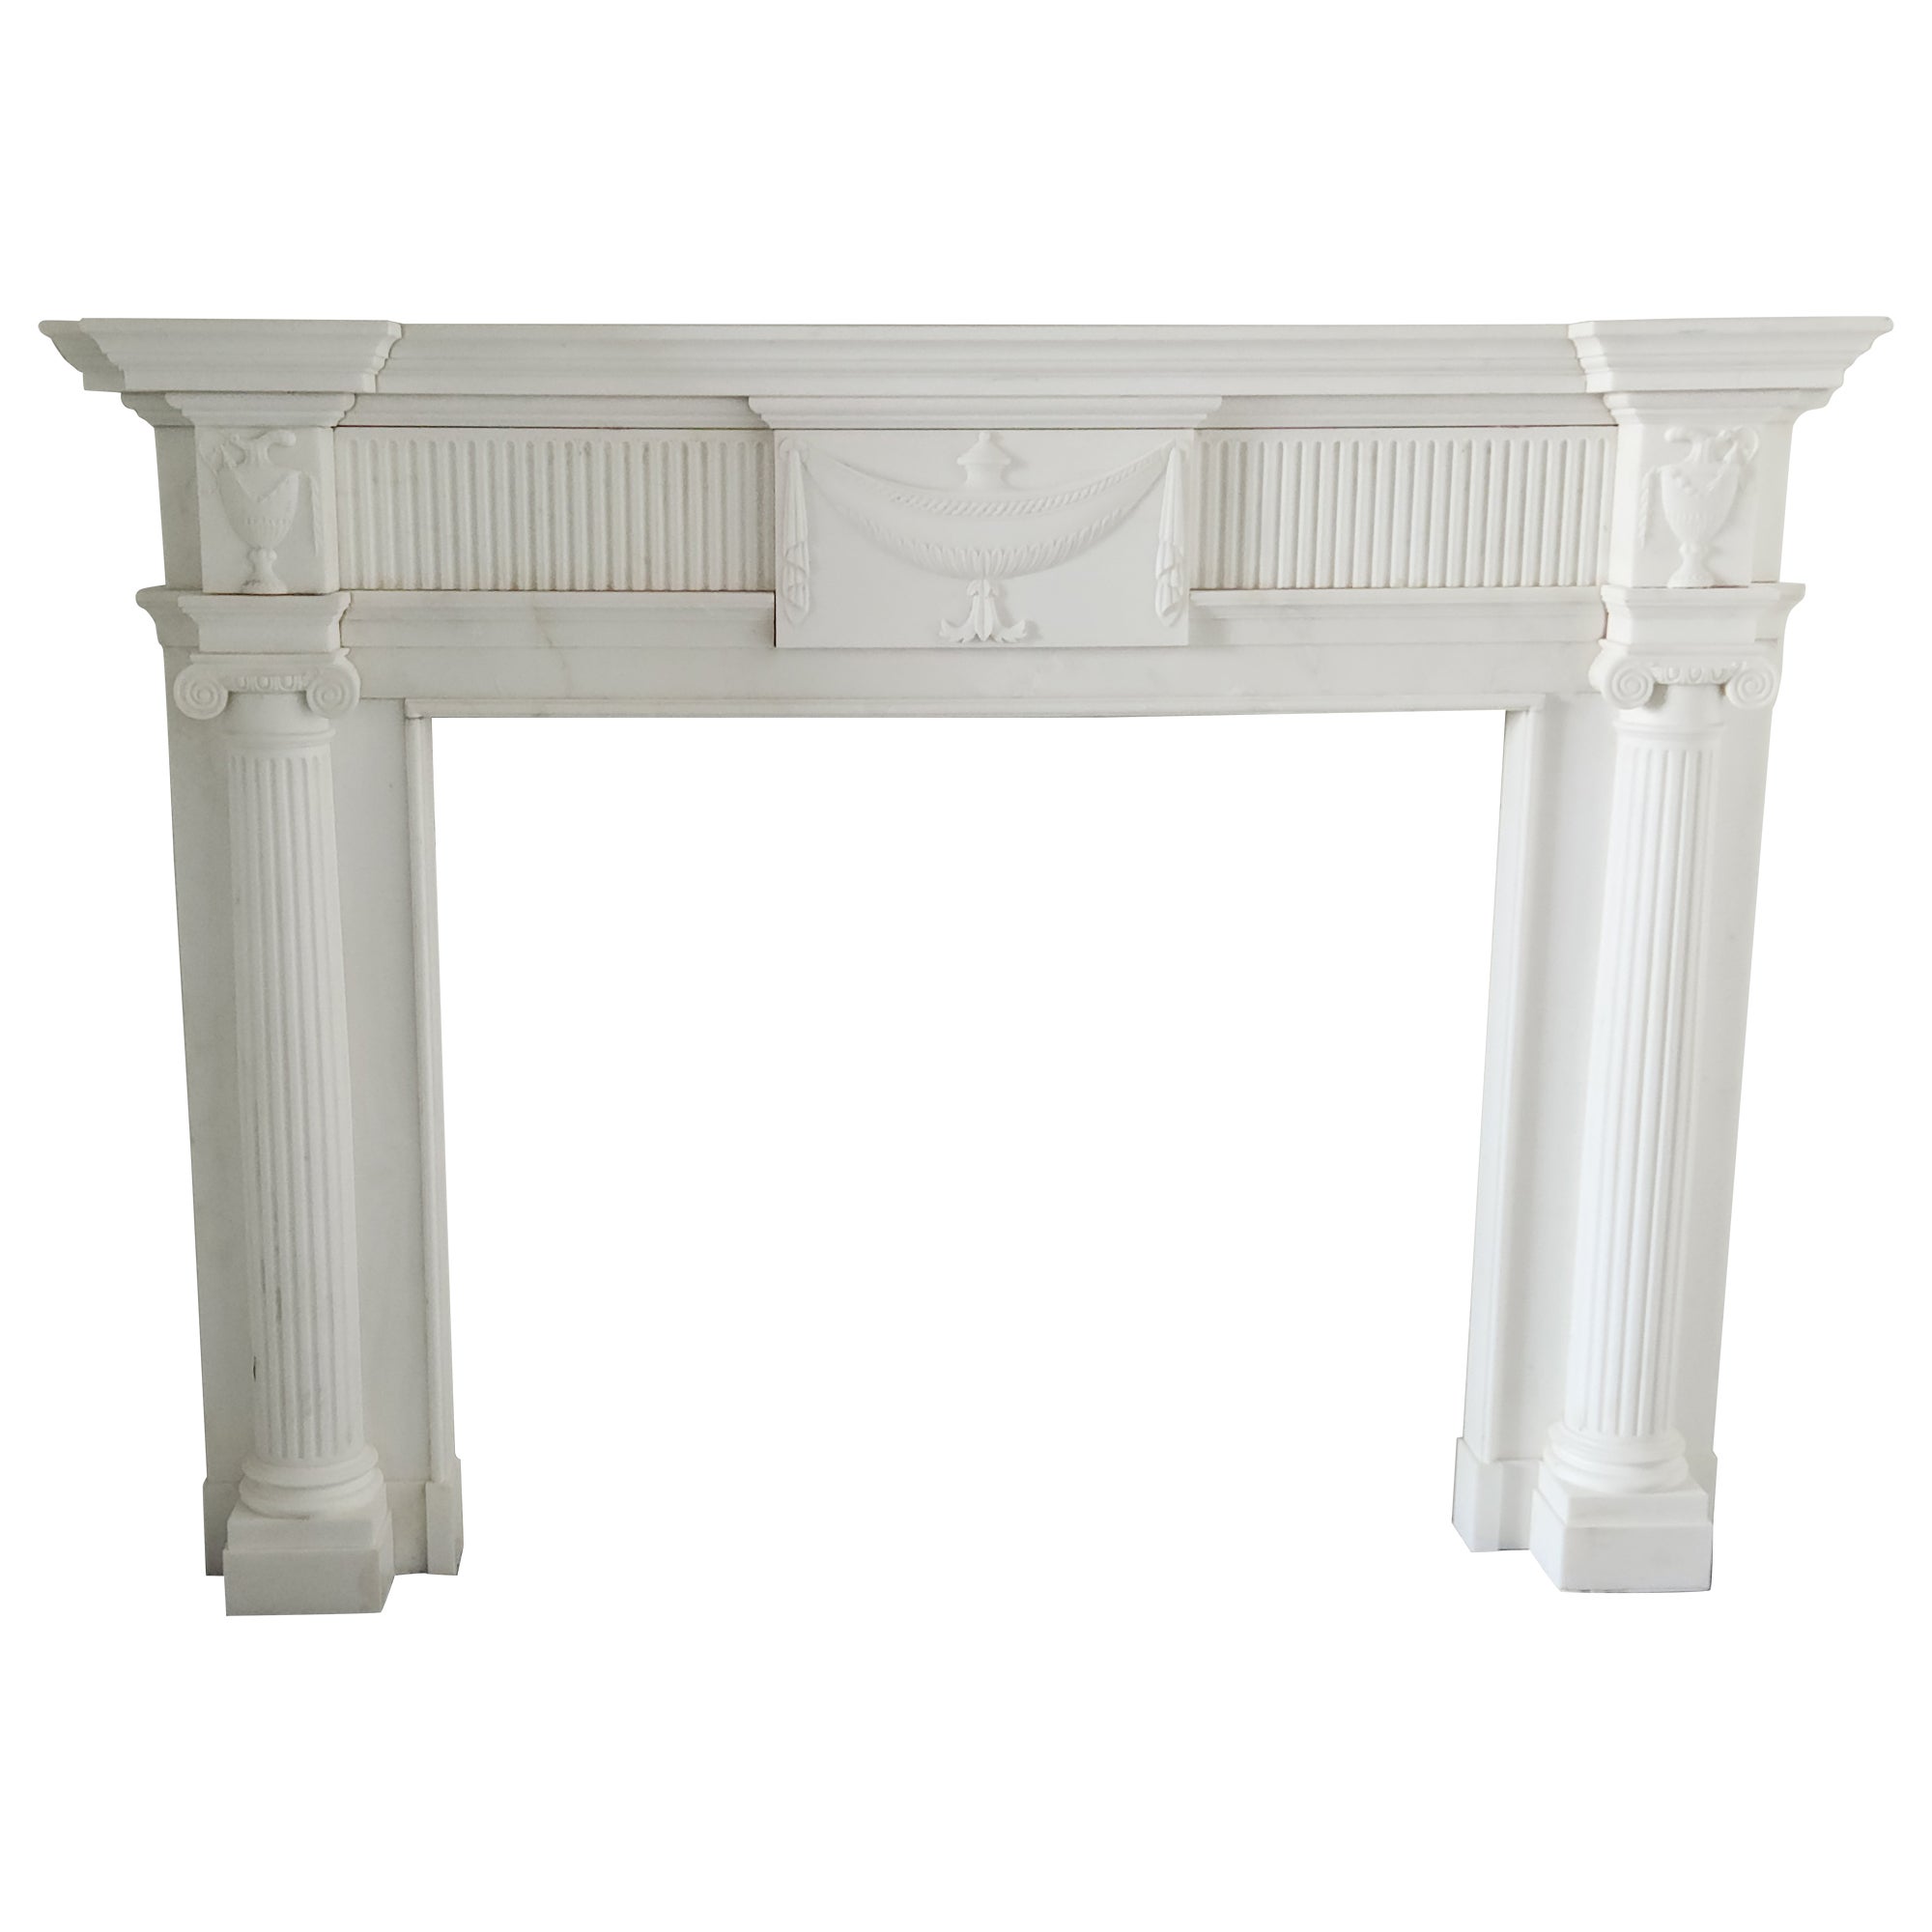 Hand-Carved White Marble Fireplace Mantel with Fluting in the Regency Style For Sale